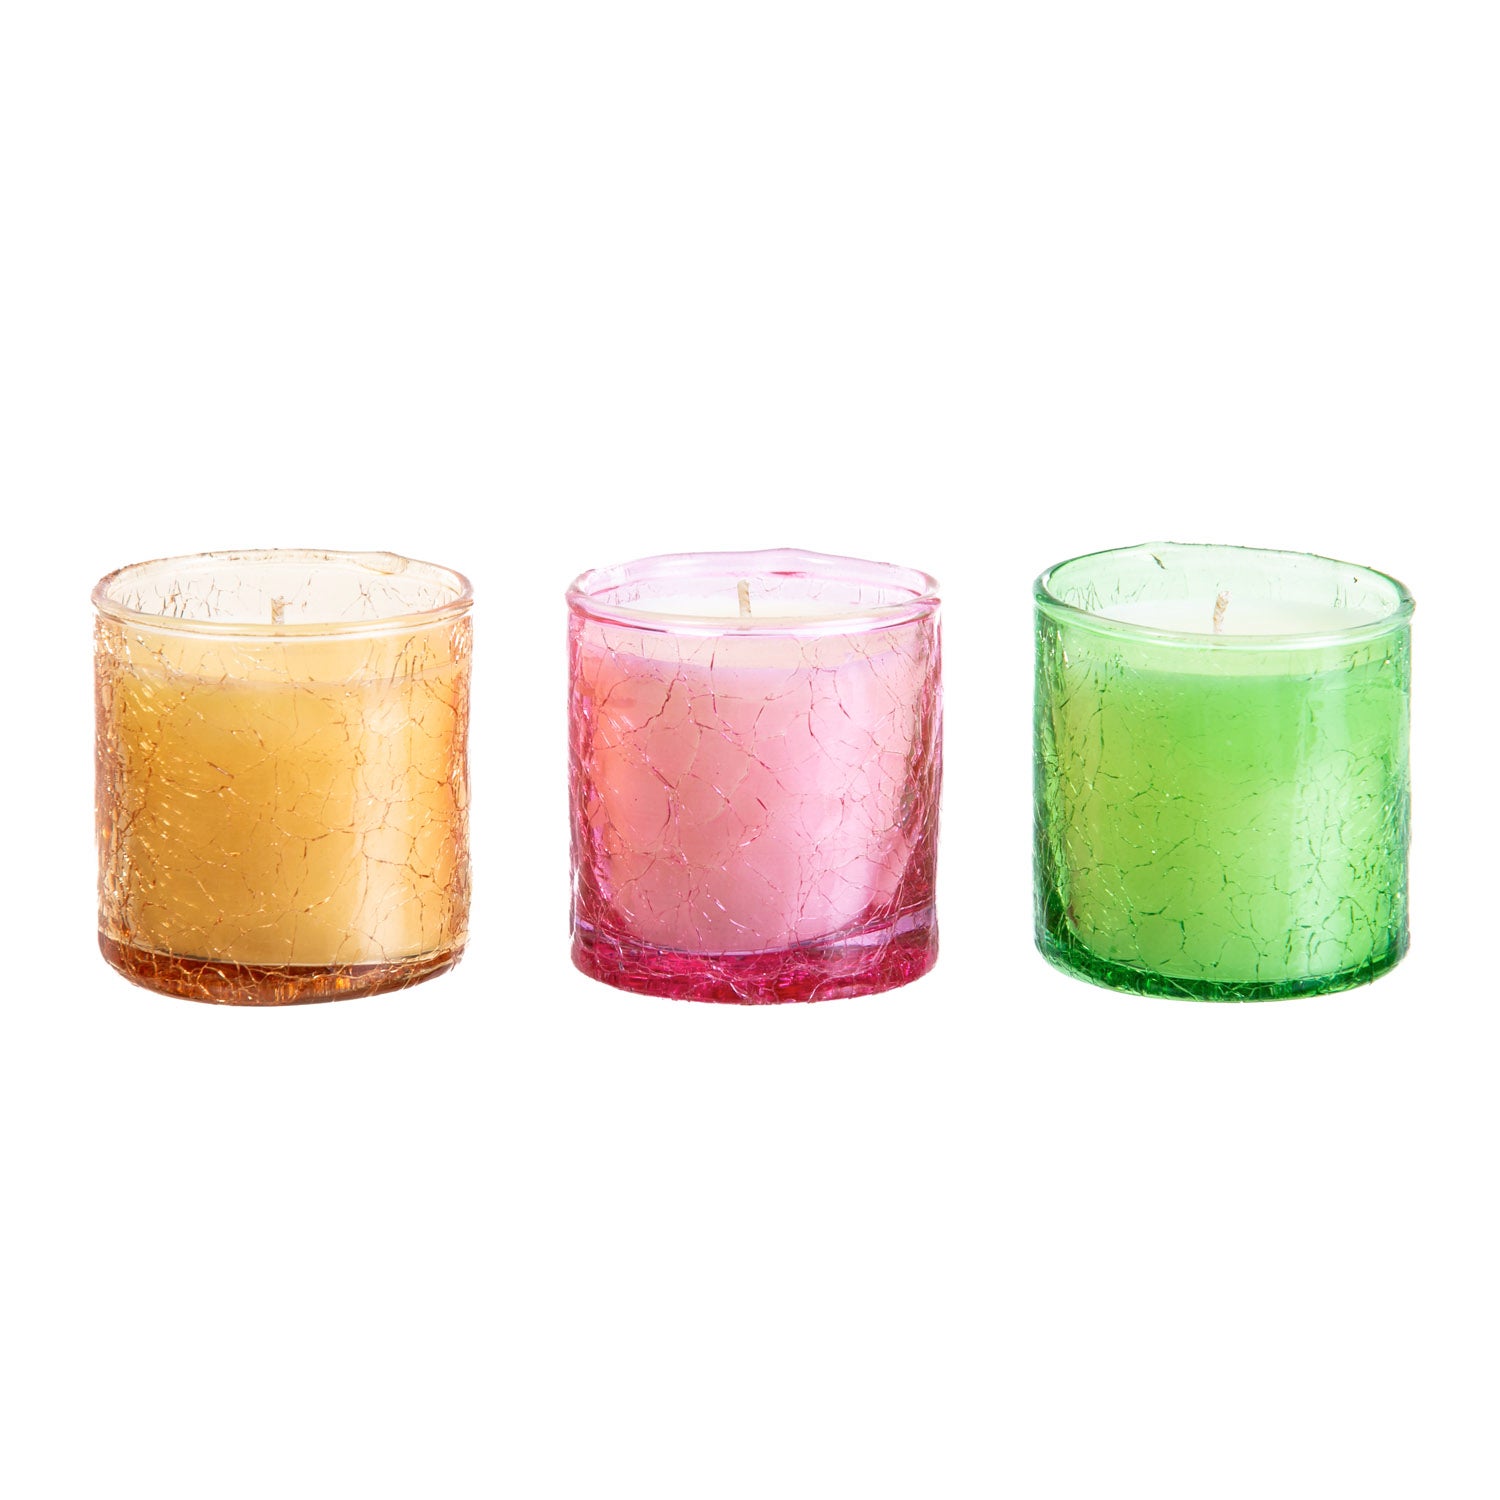 Orange, Pink, and Green Crackle Finish Glass Candles, Set of 3